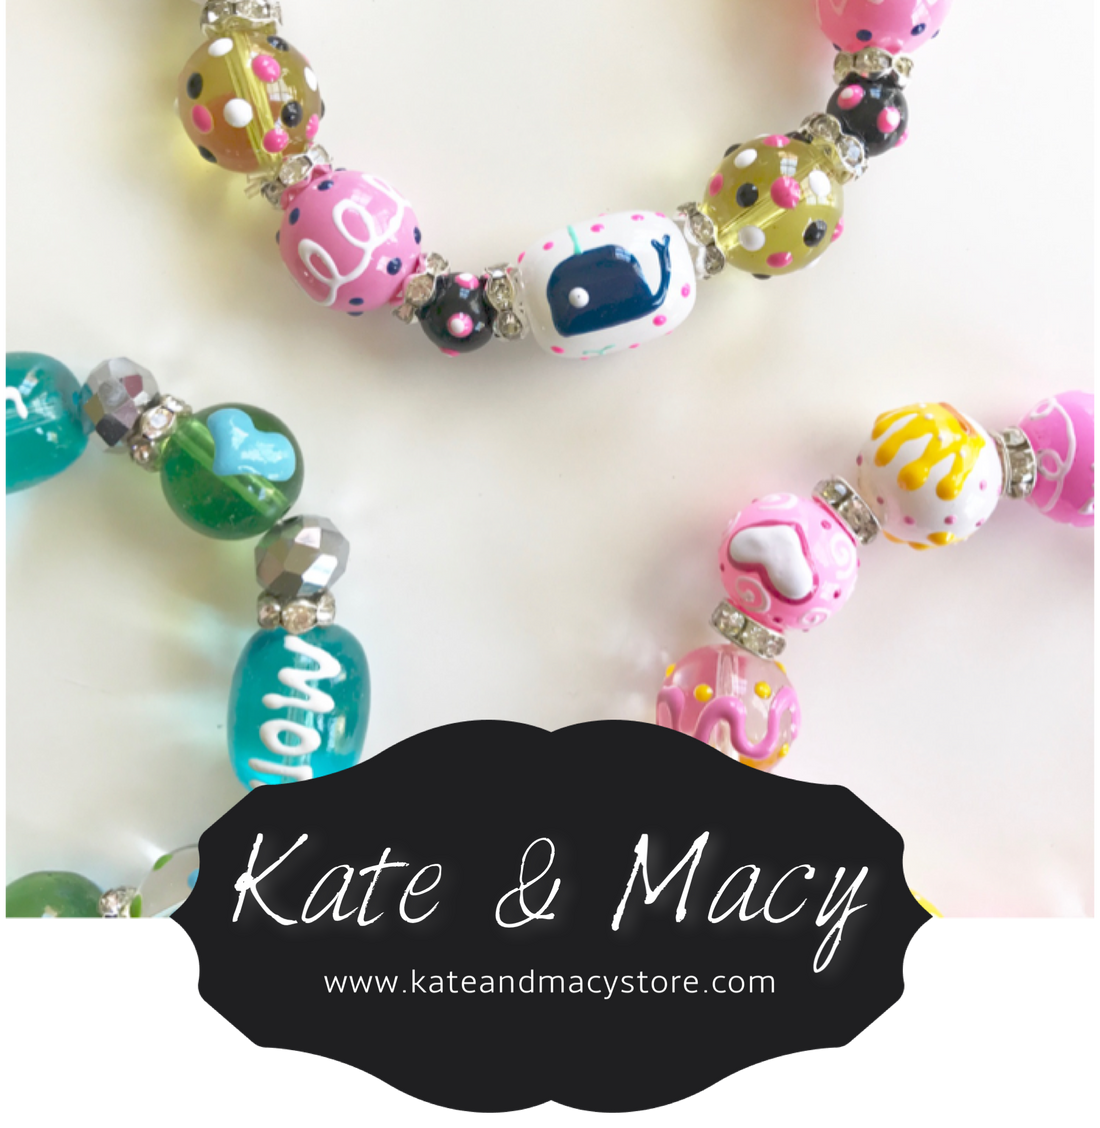 FREE Shipping on Kate & Macy